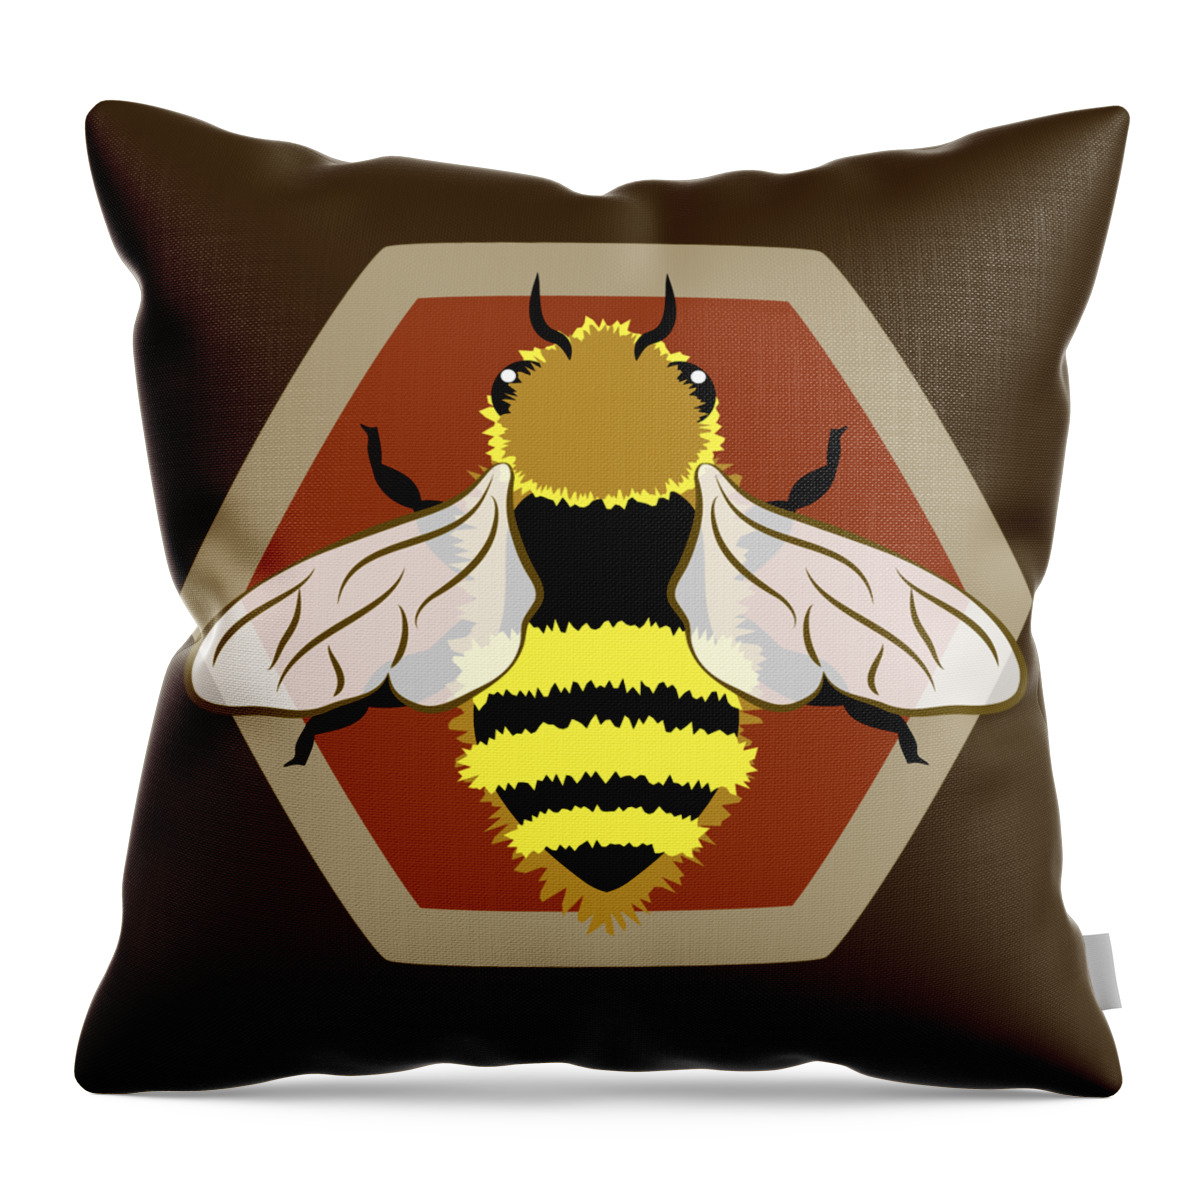 Animal Graphic Throw Pillow featuring the digital art Honey Bee Graphic by MM Anderson